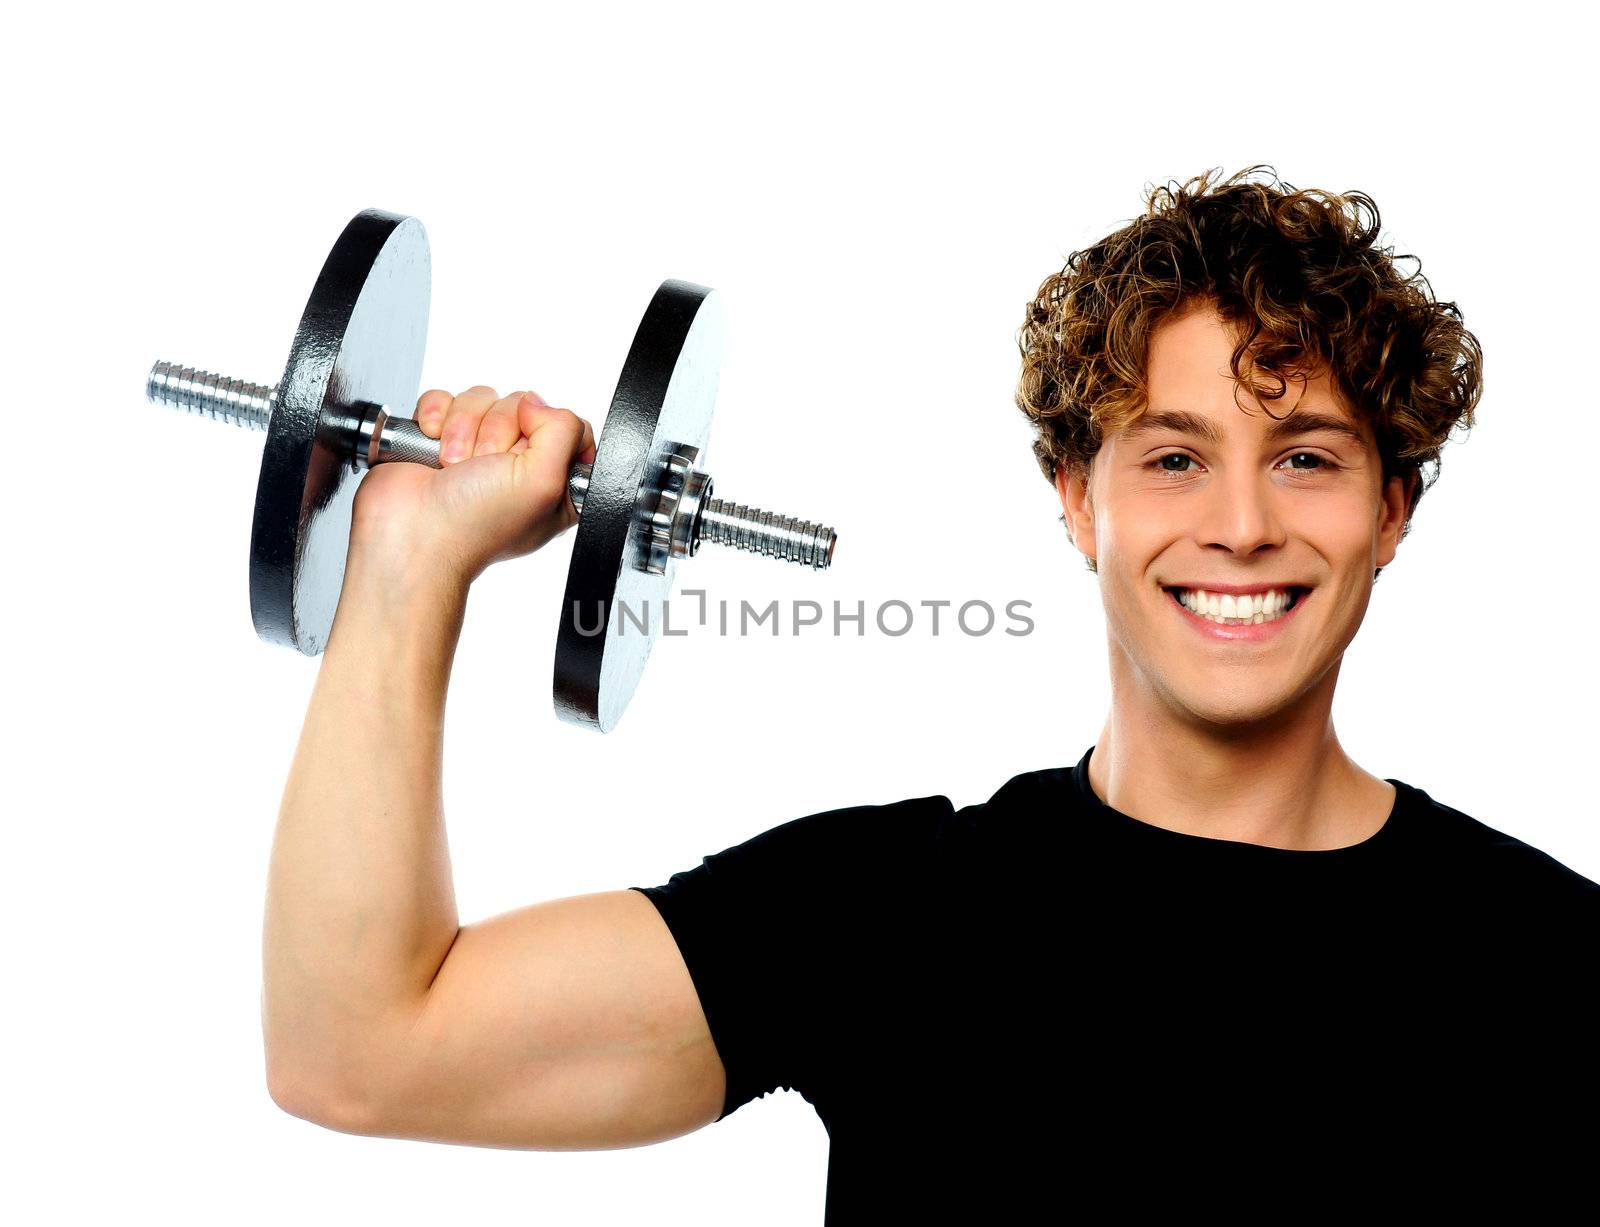 Powerful muscular young man lifting weight, smiling pose